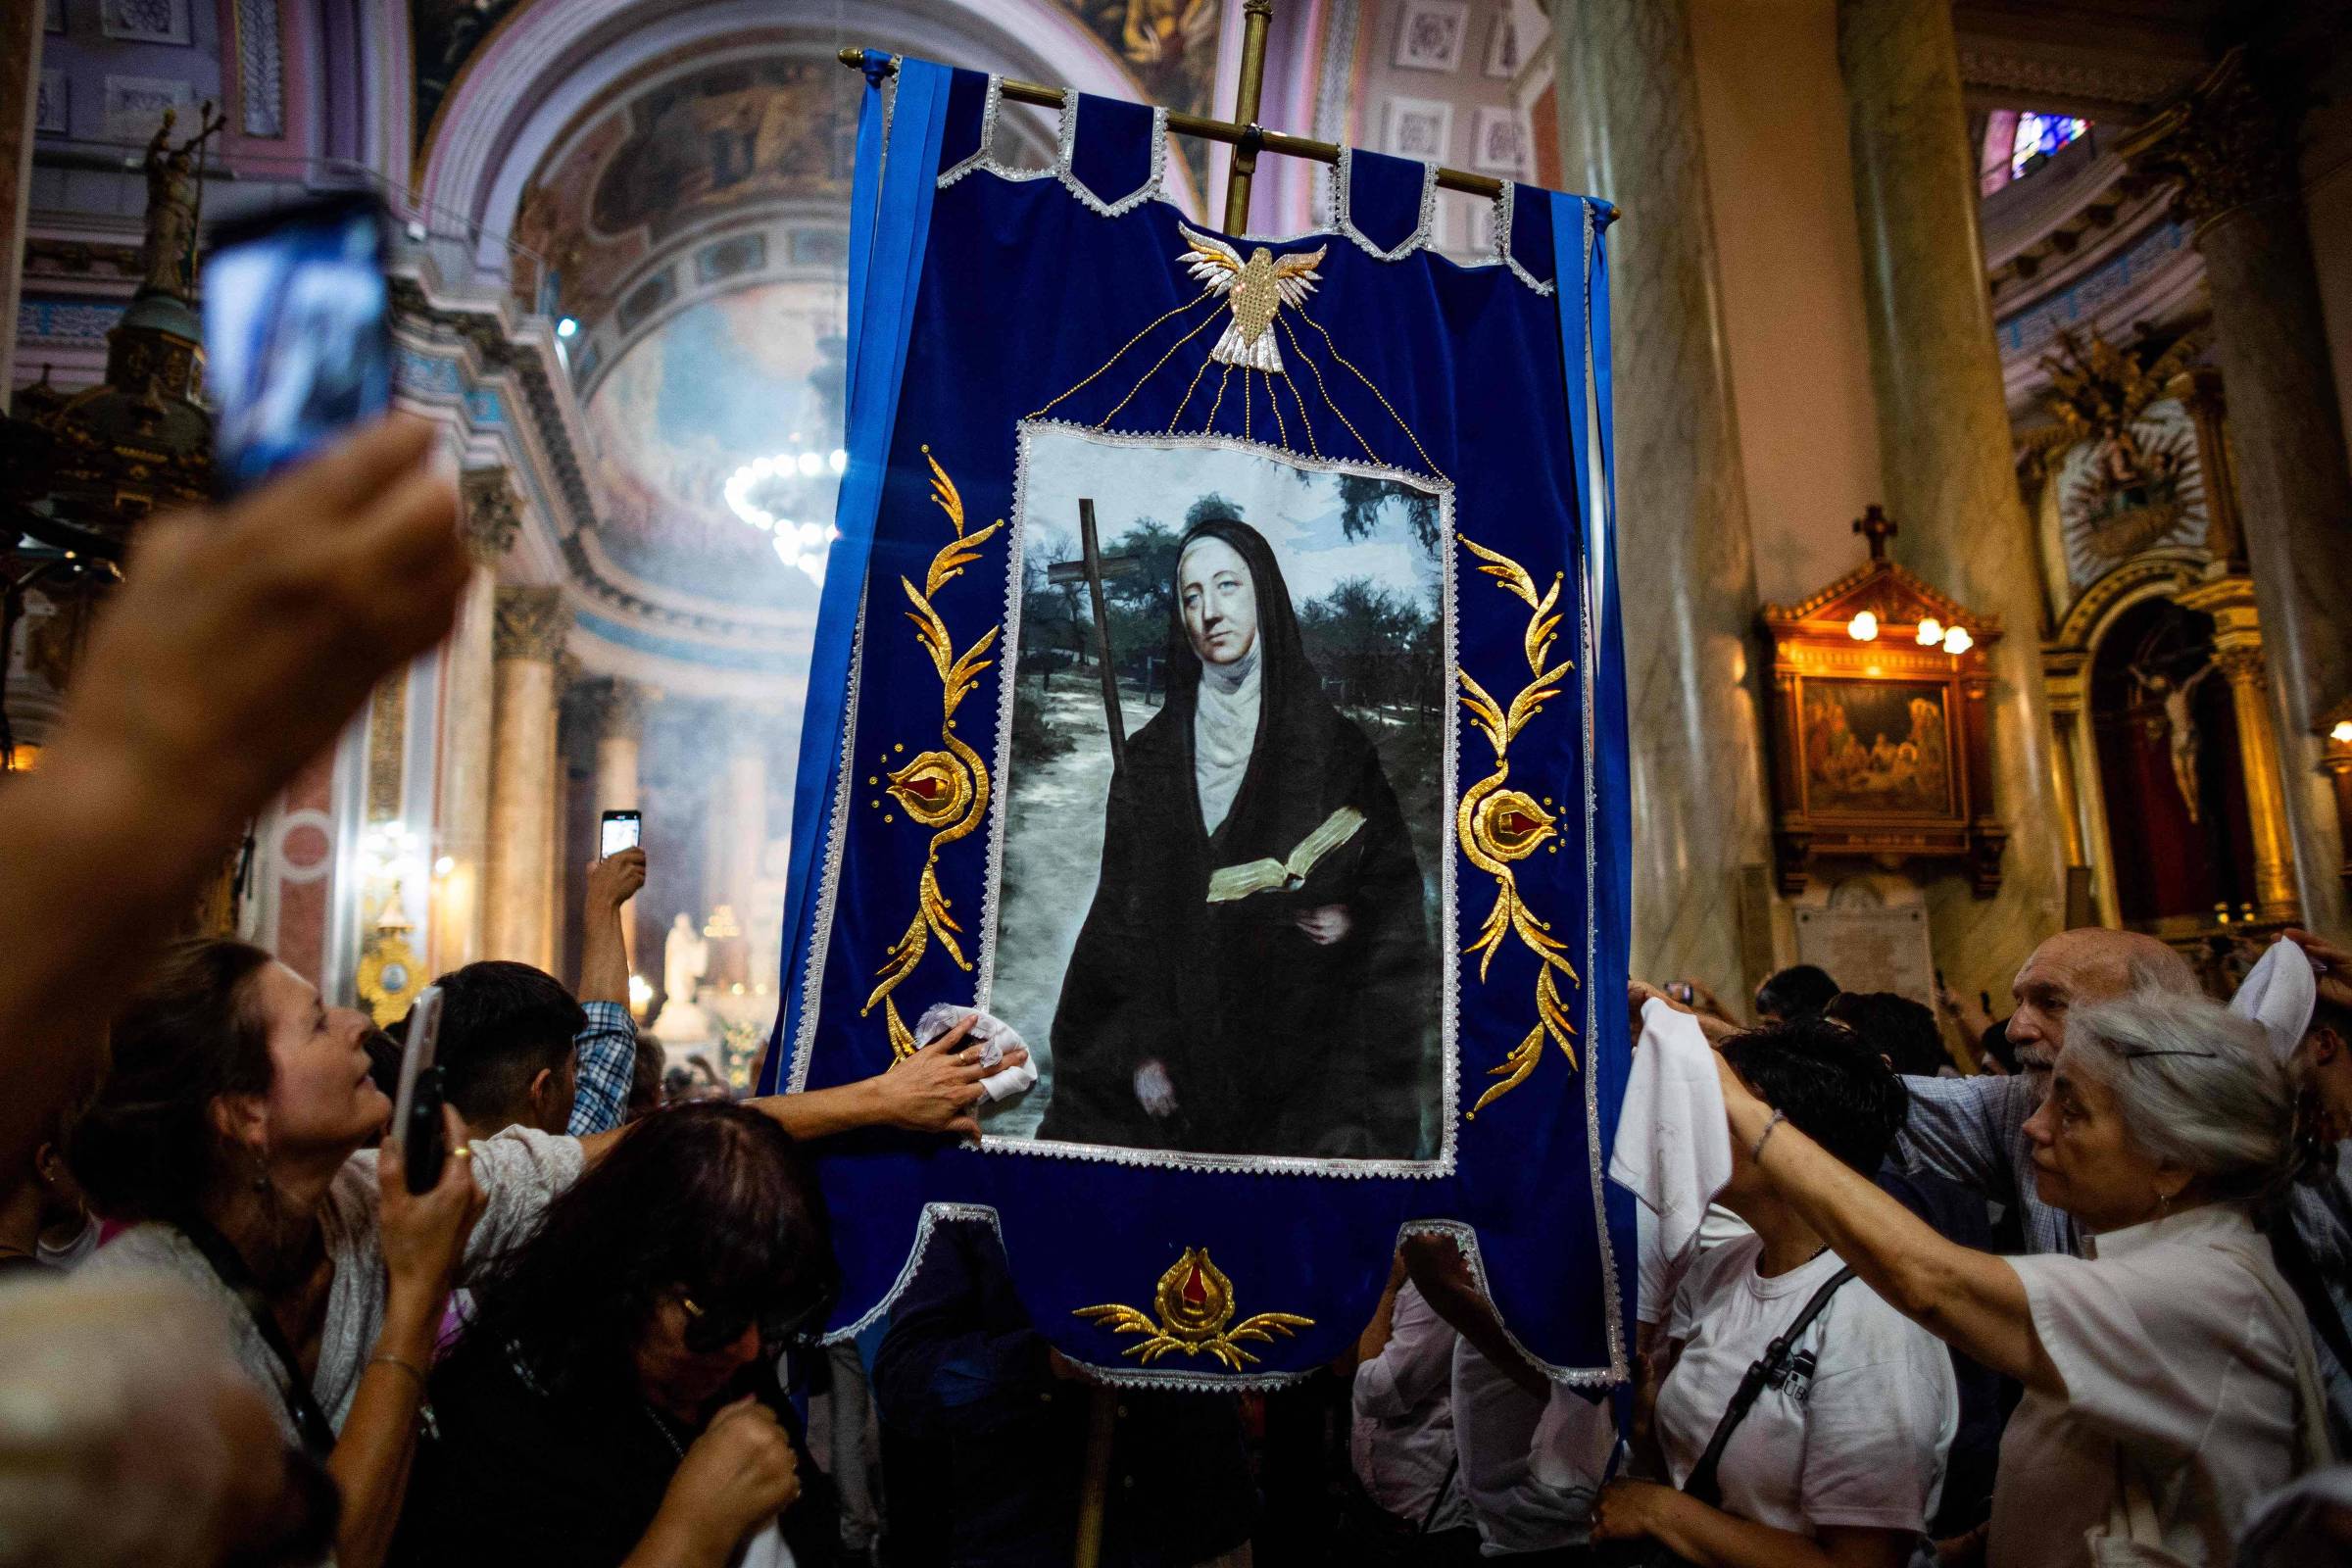 Meet Mama Antula, the first Argentine saint canonized by the Catholic Church